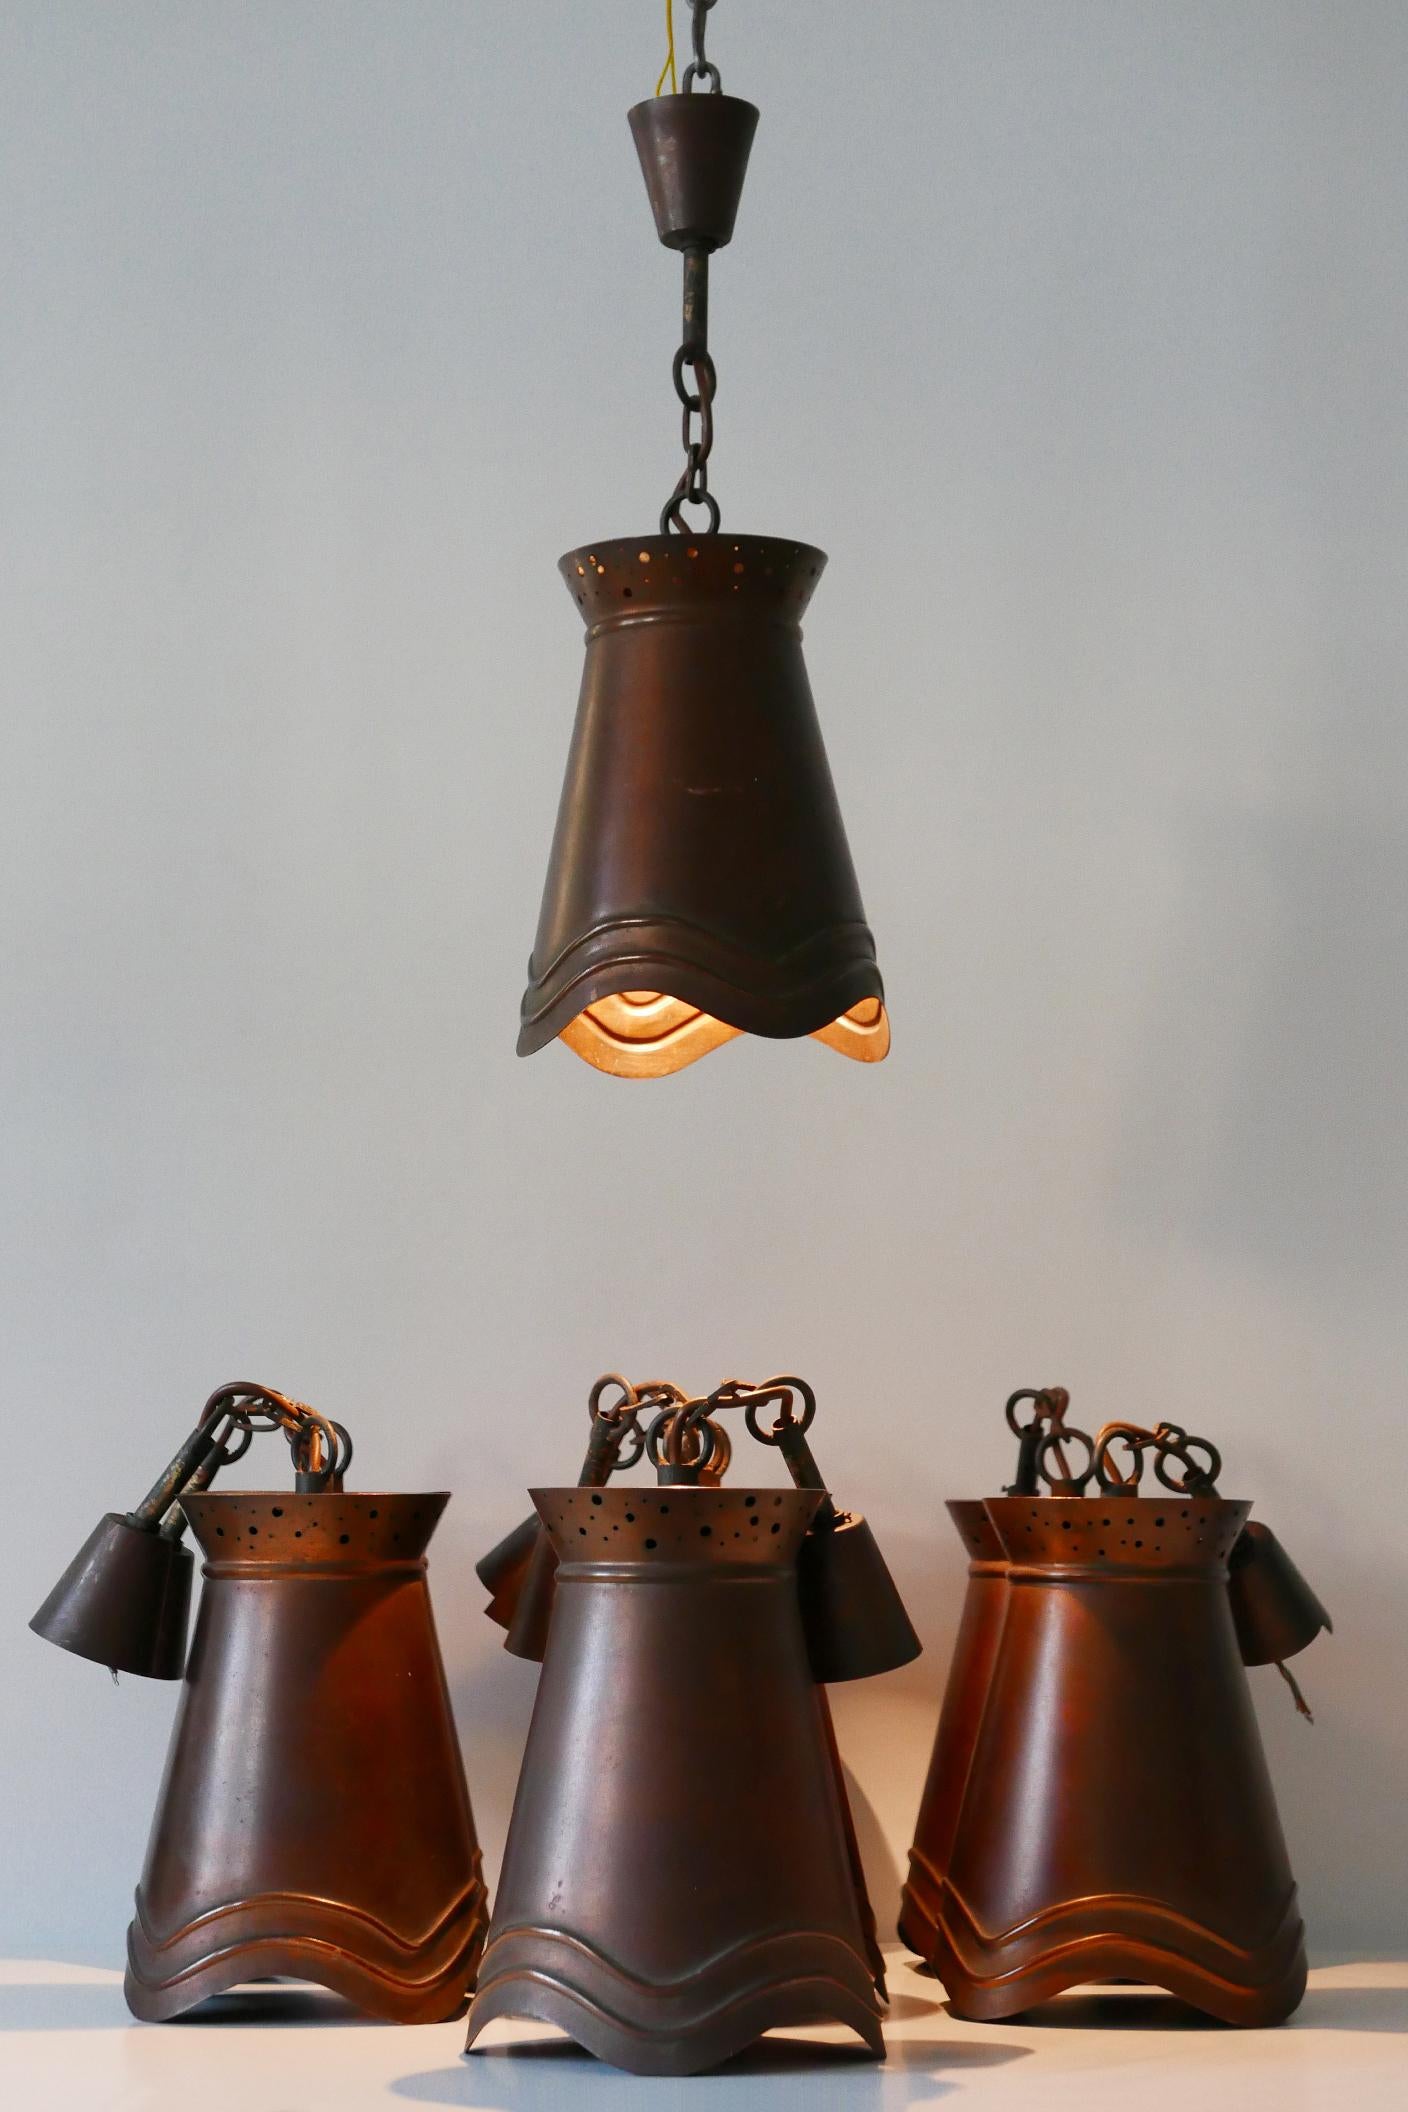 Mid-Century Modern Copper Pendant Lamps or Hanging Lights, Germany, 1950s For Sale 10